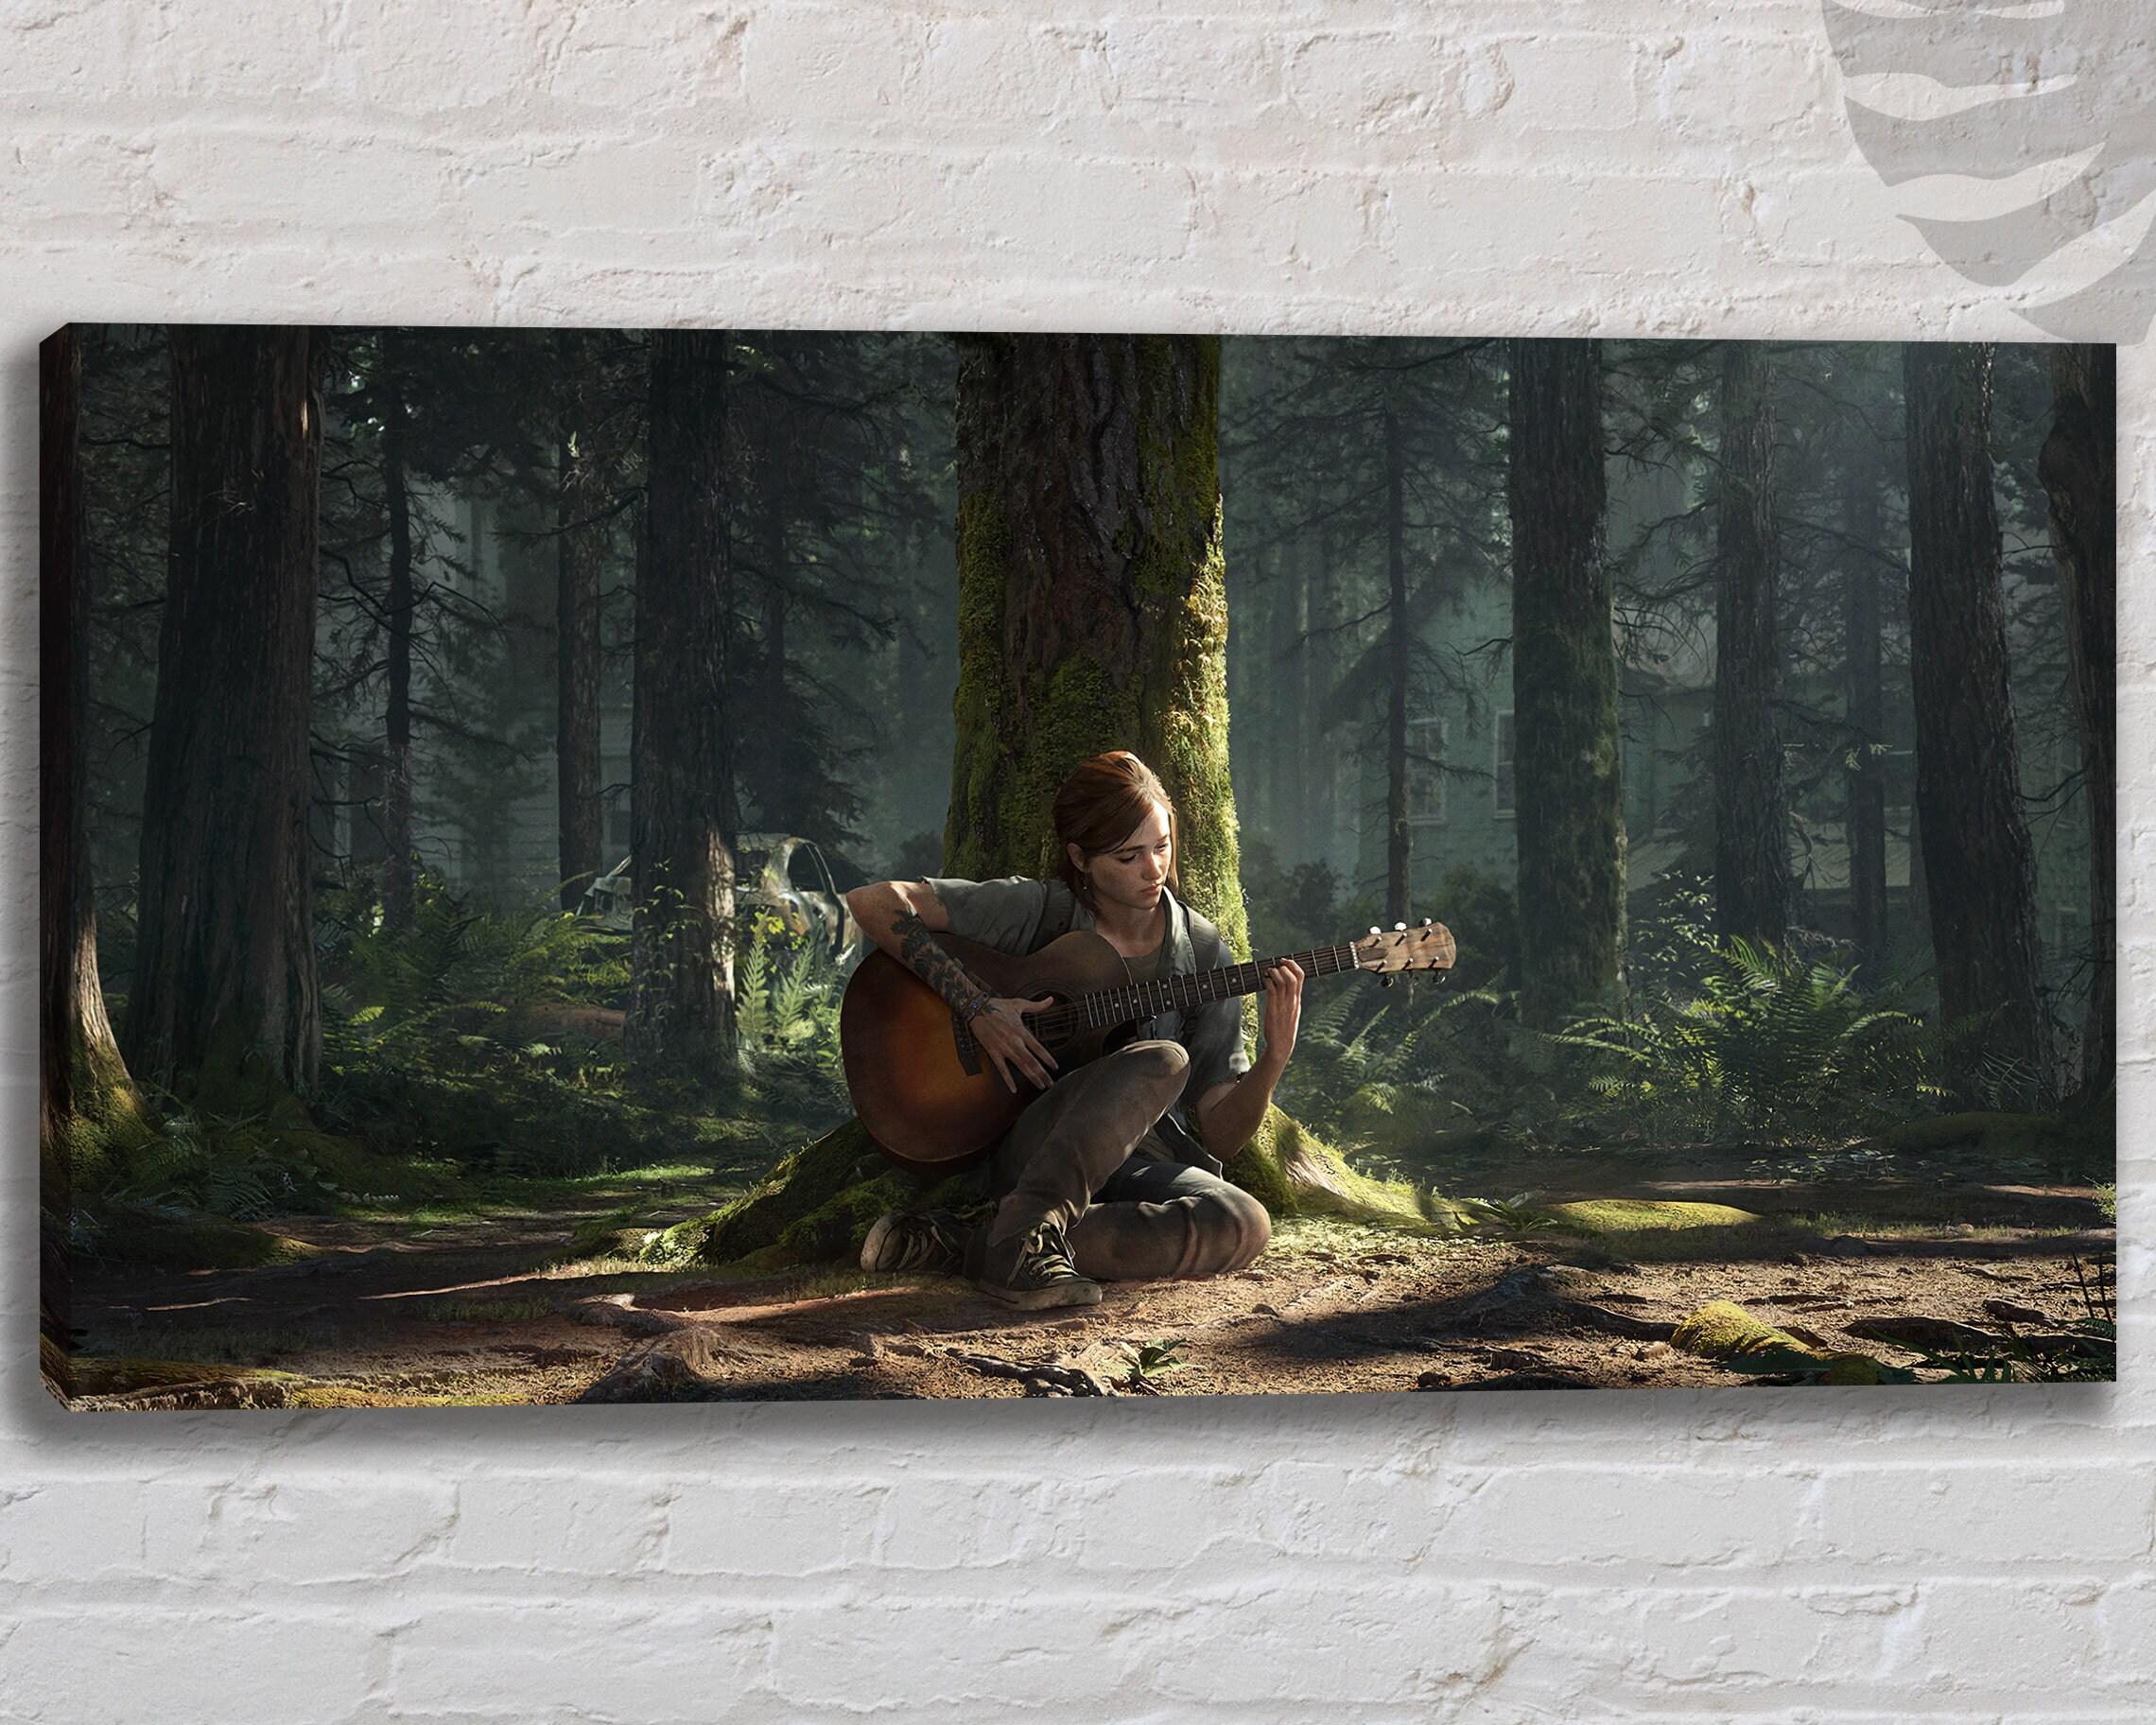 The Last of Us 2: Maxi Poster - Ellie (1022)  The last of us, Gaming  posters, Film prints